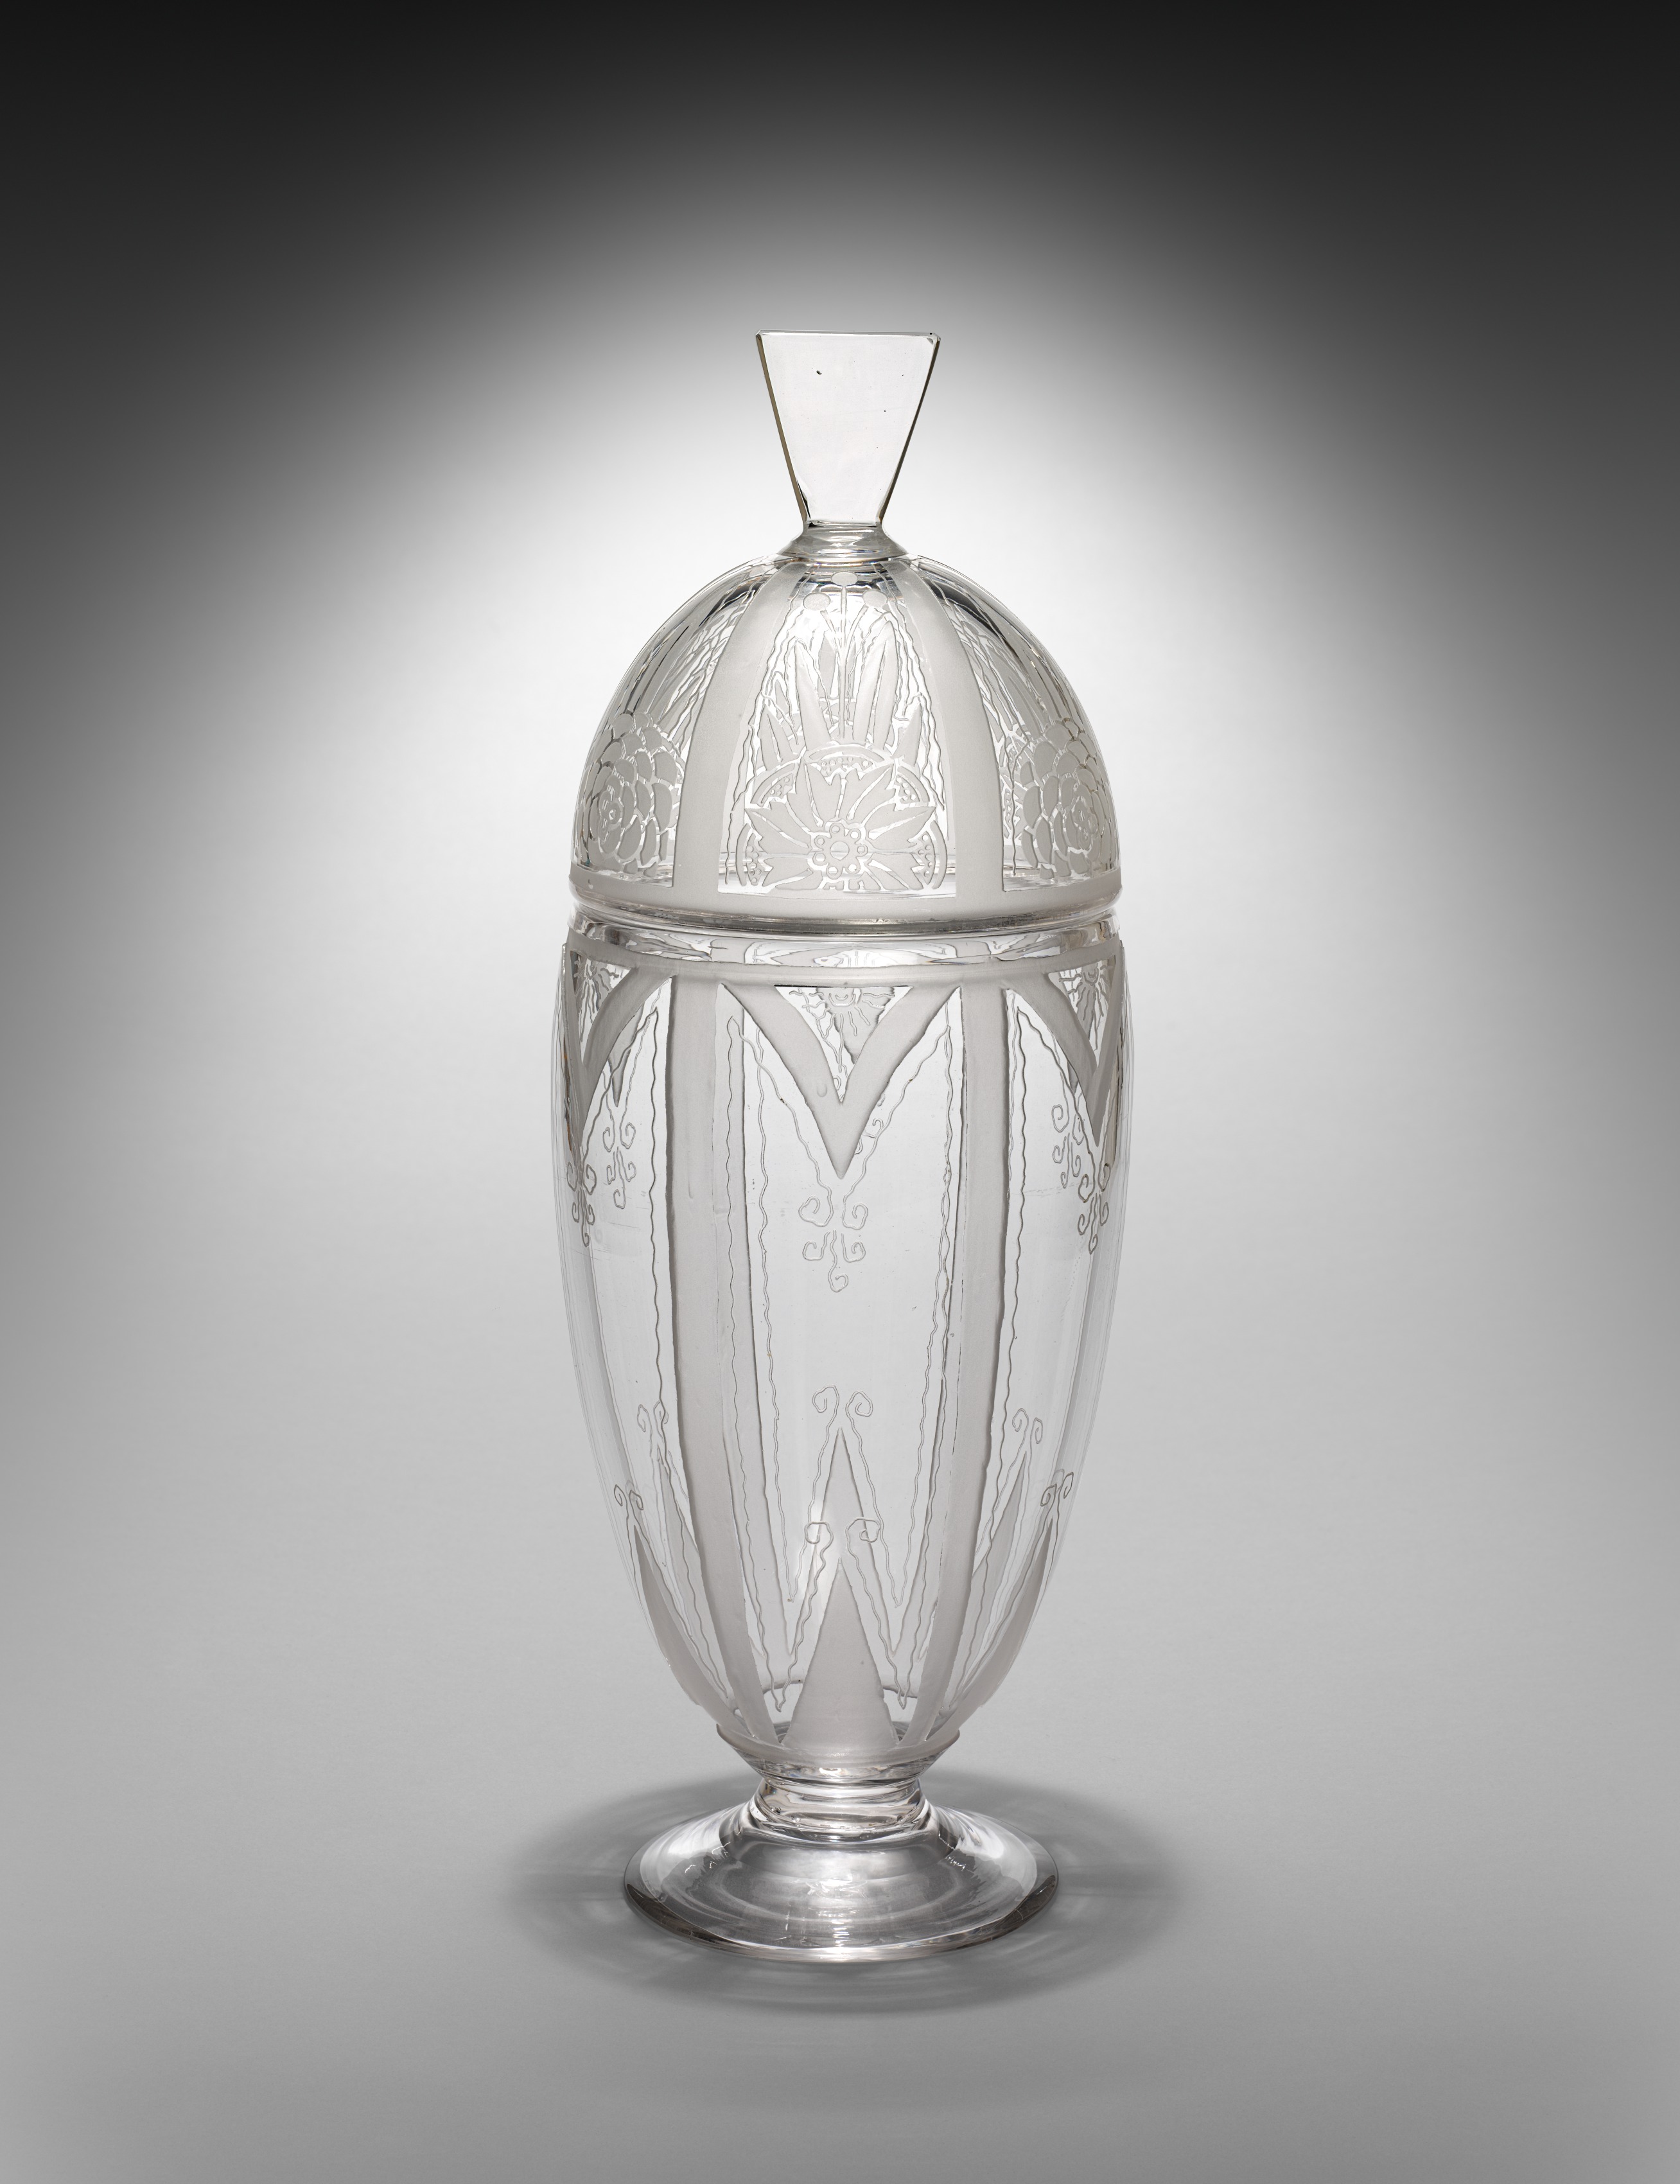 Covered Vase (One of a Pair)